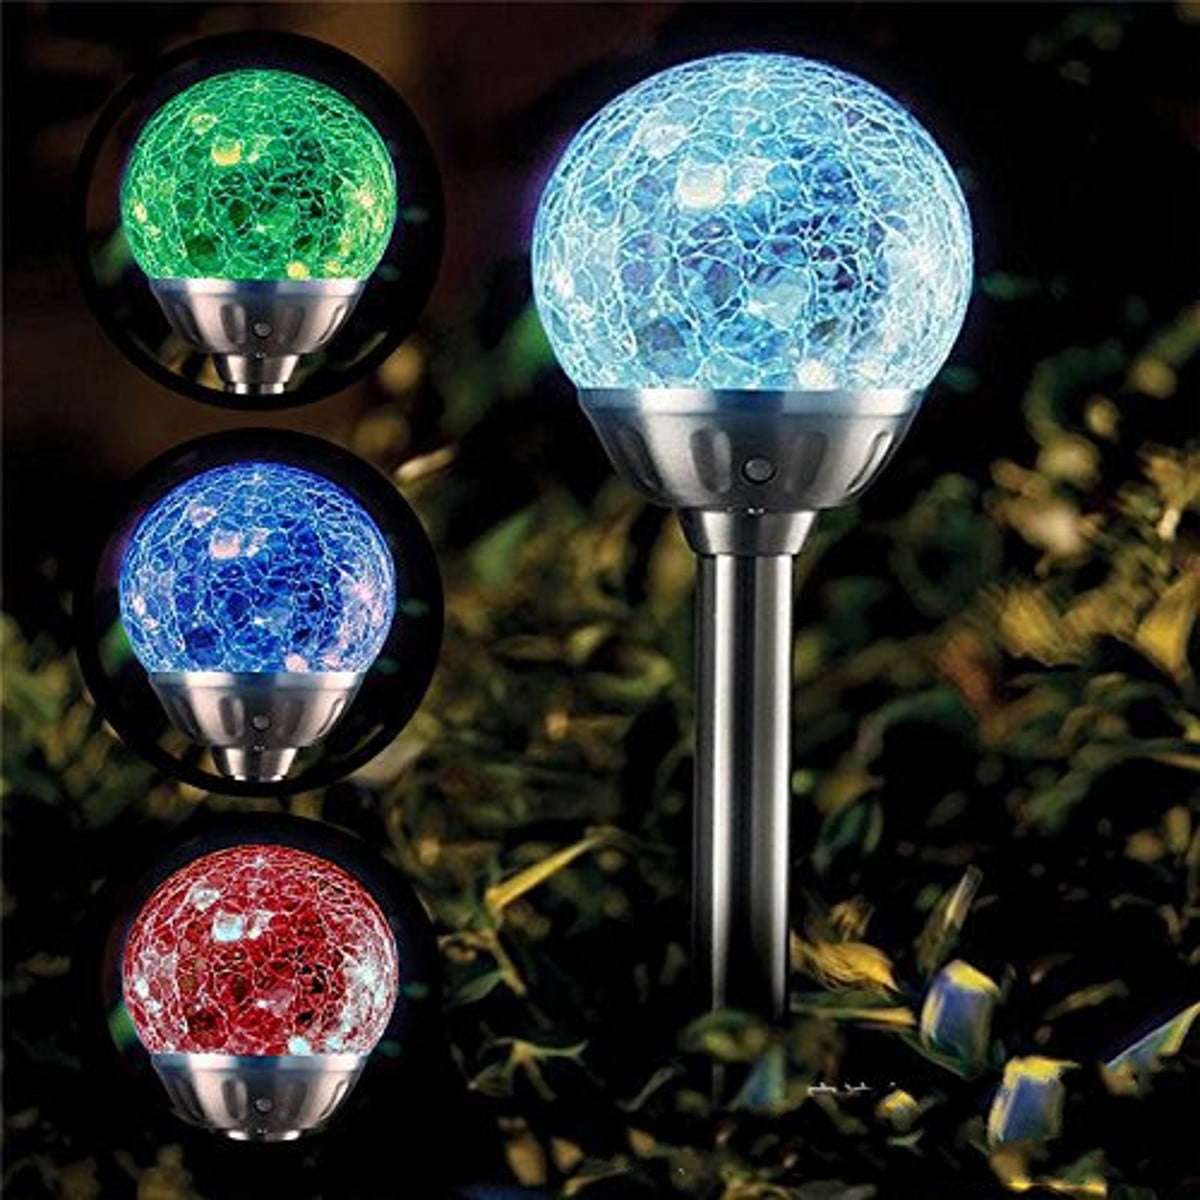 Solar Lights Outdoor 4Pack Pathway Light Set Decorative Garden Path Stake Lamp Bright White Blue Dual Color LED Yard Decorations Landscape Lighting Stainless Steel Driveway Stakes for Walkway Patio 